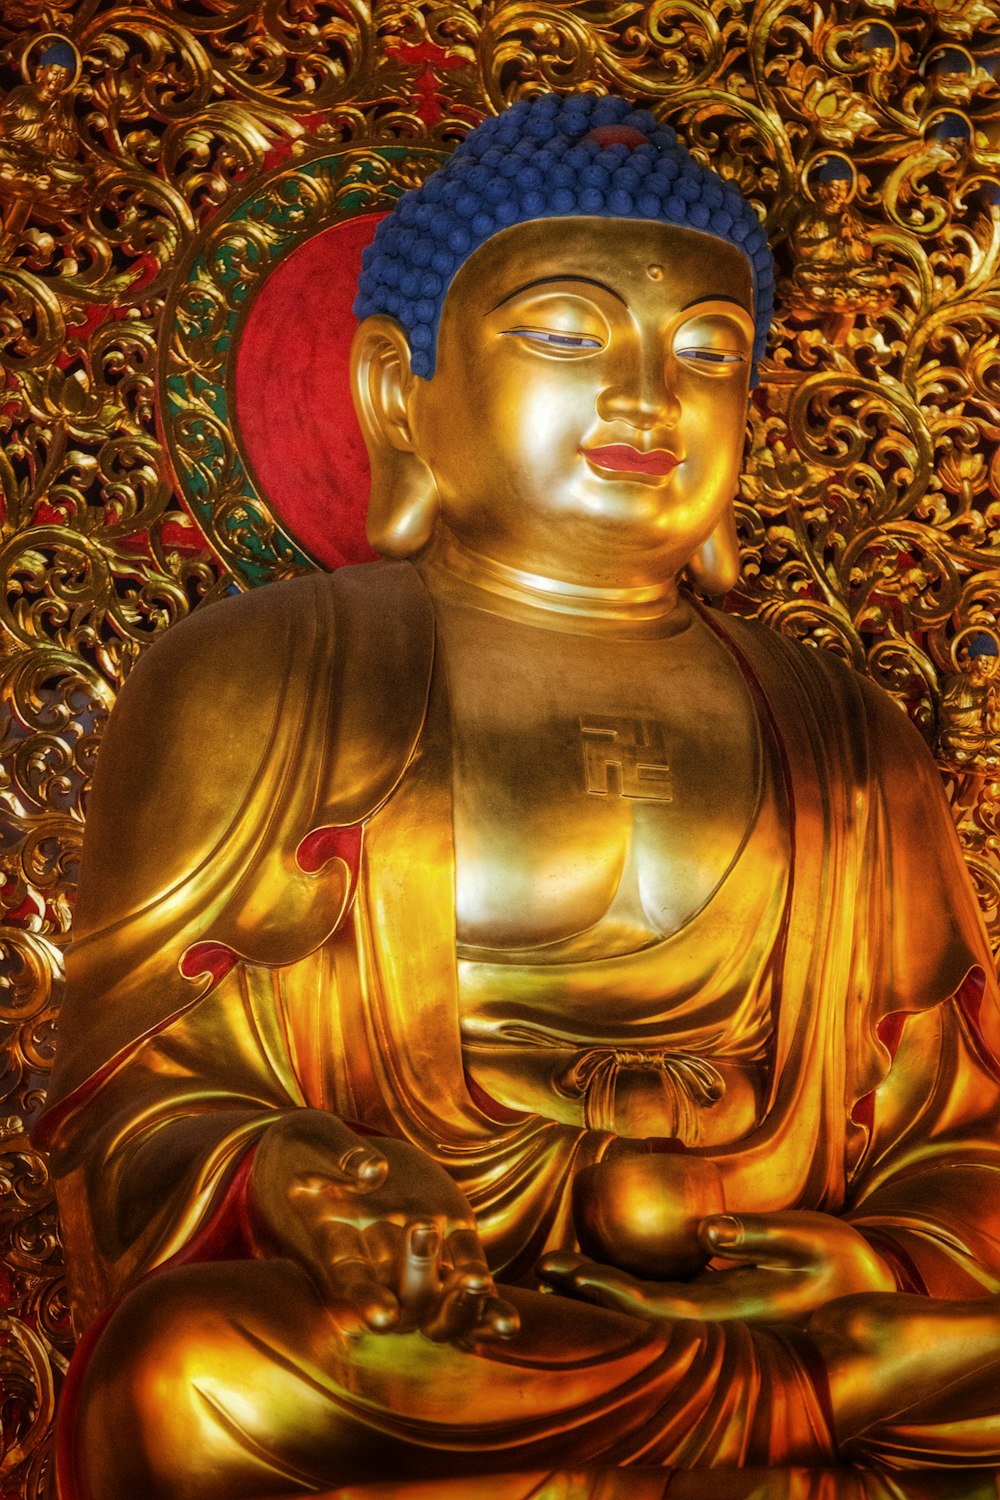 a golden buddha statue with a red hat on